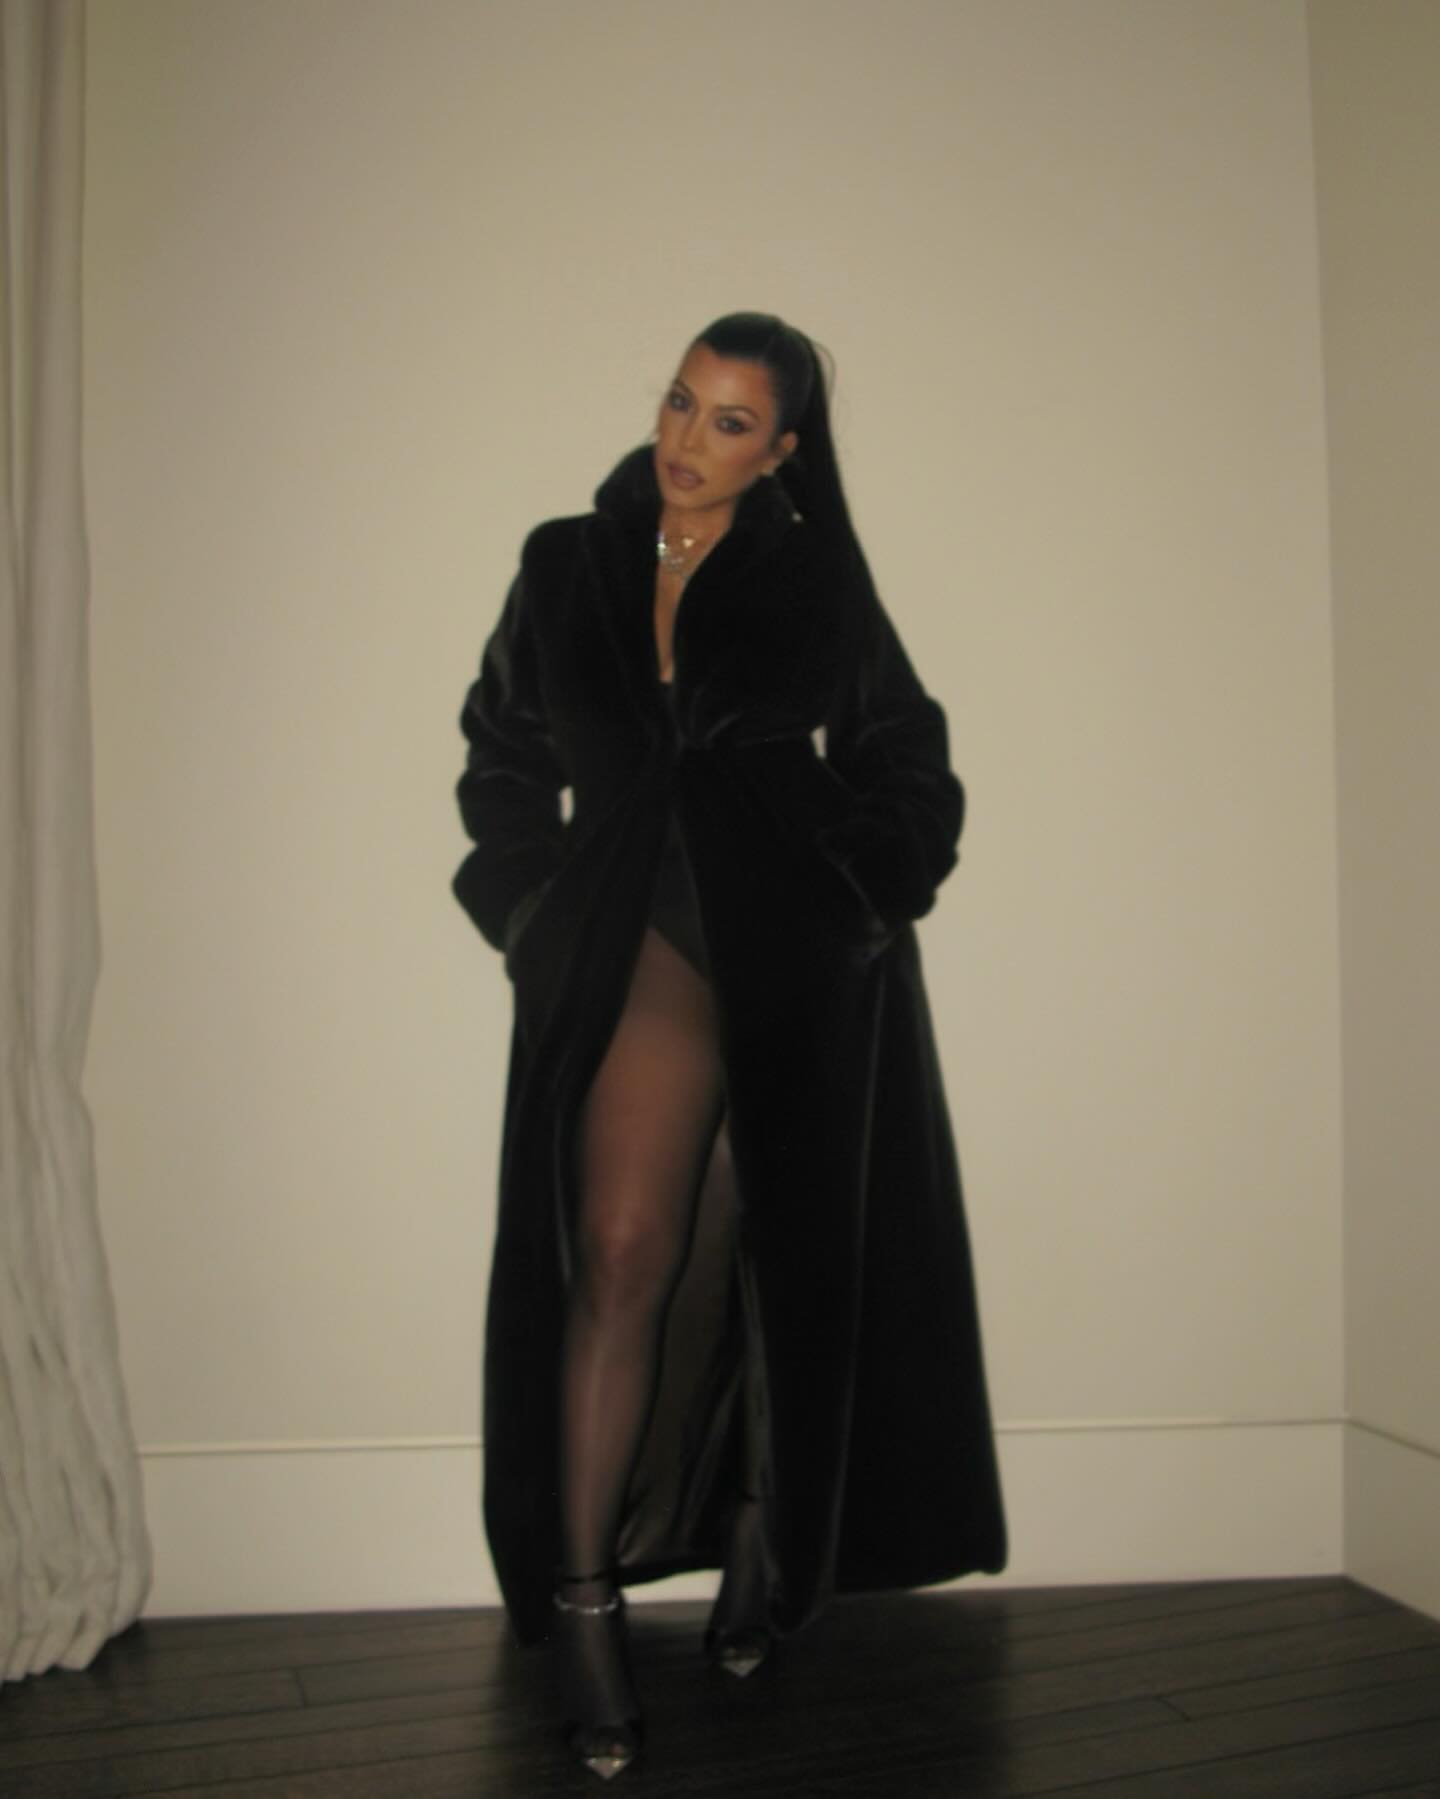 Kourtney flaunted her post-baby body while posing for a series of sultry snaps that showcased her head-turning outfit for the Kardashian Christmas Eve Party